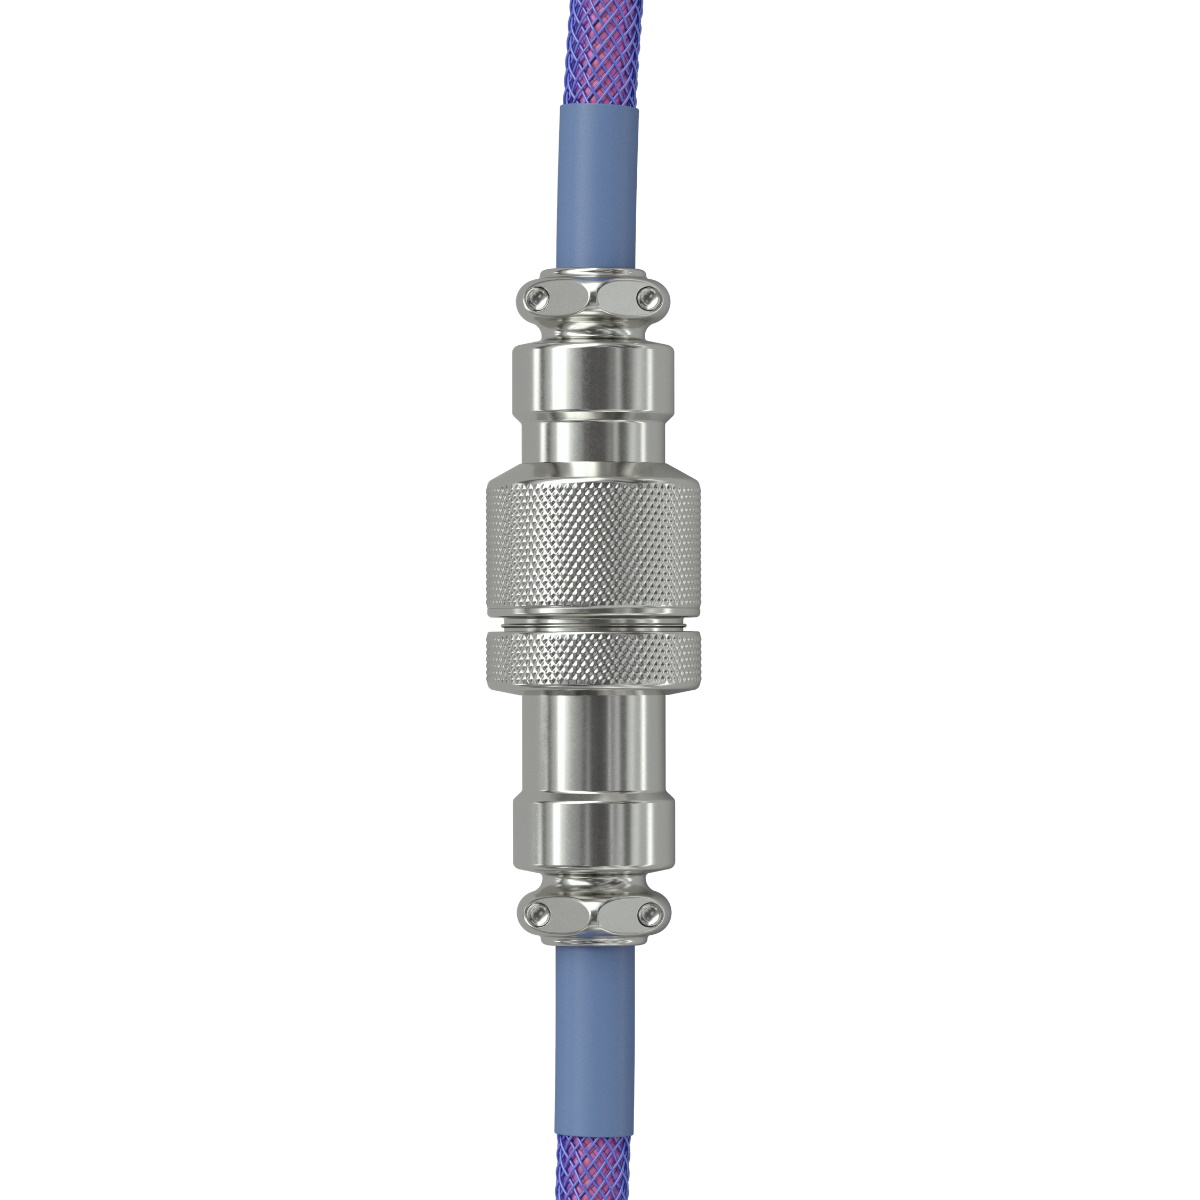 Glorious - Glorious Coiled Cable USB-C to USB-A - Purple (GLO-CBL-COIL-NEBULA)